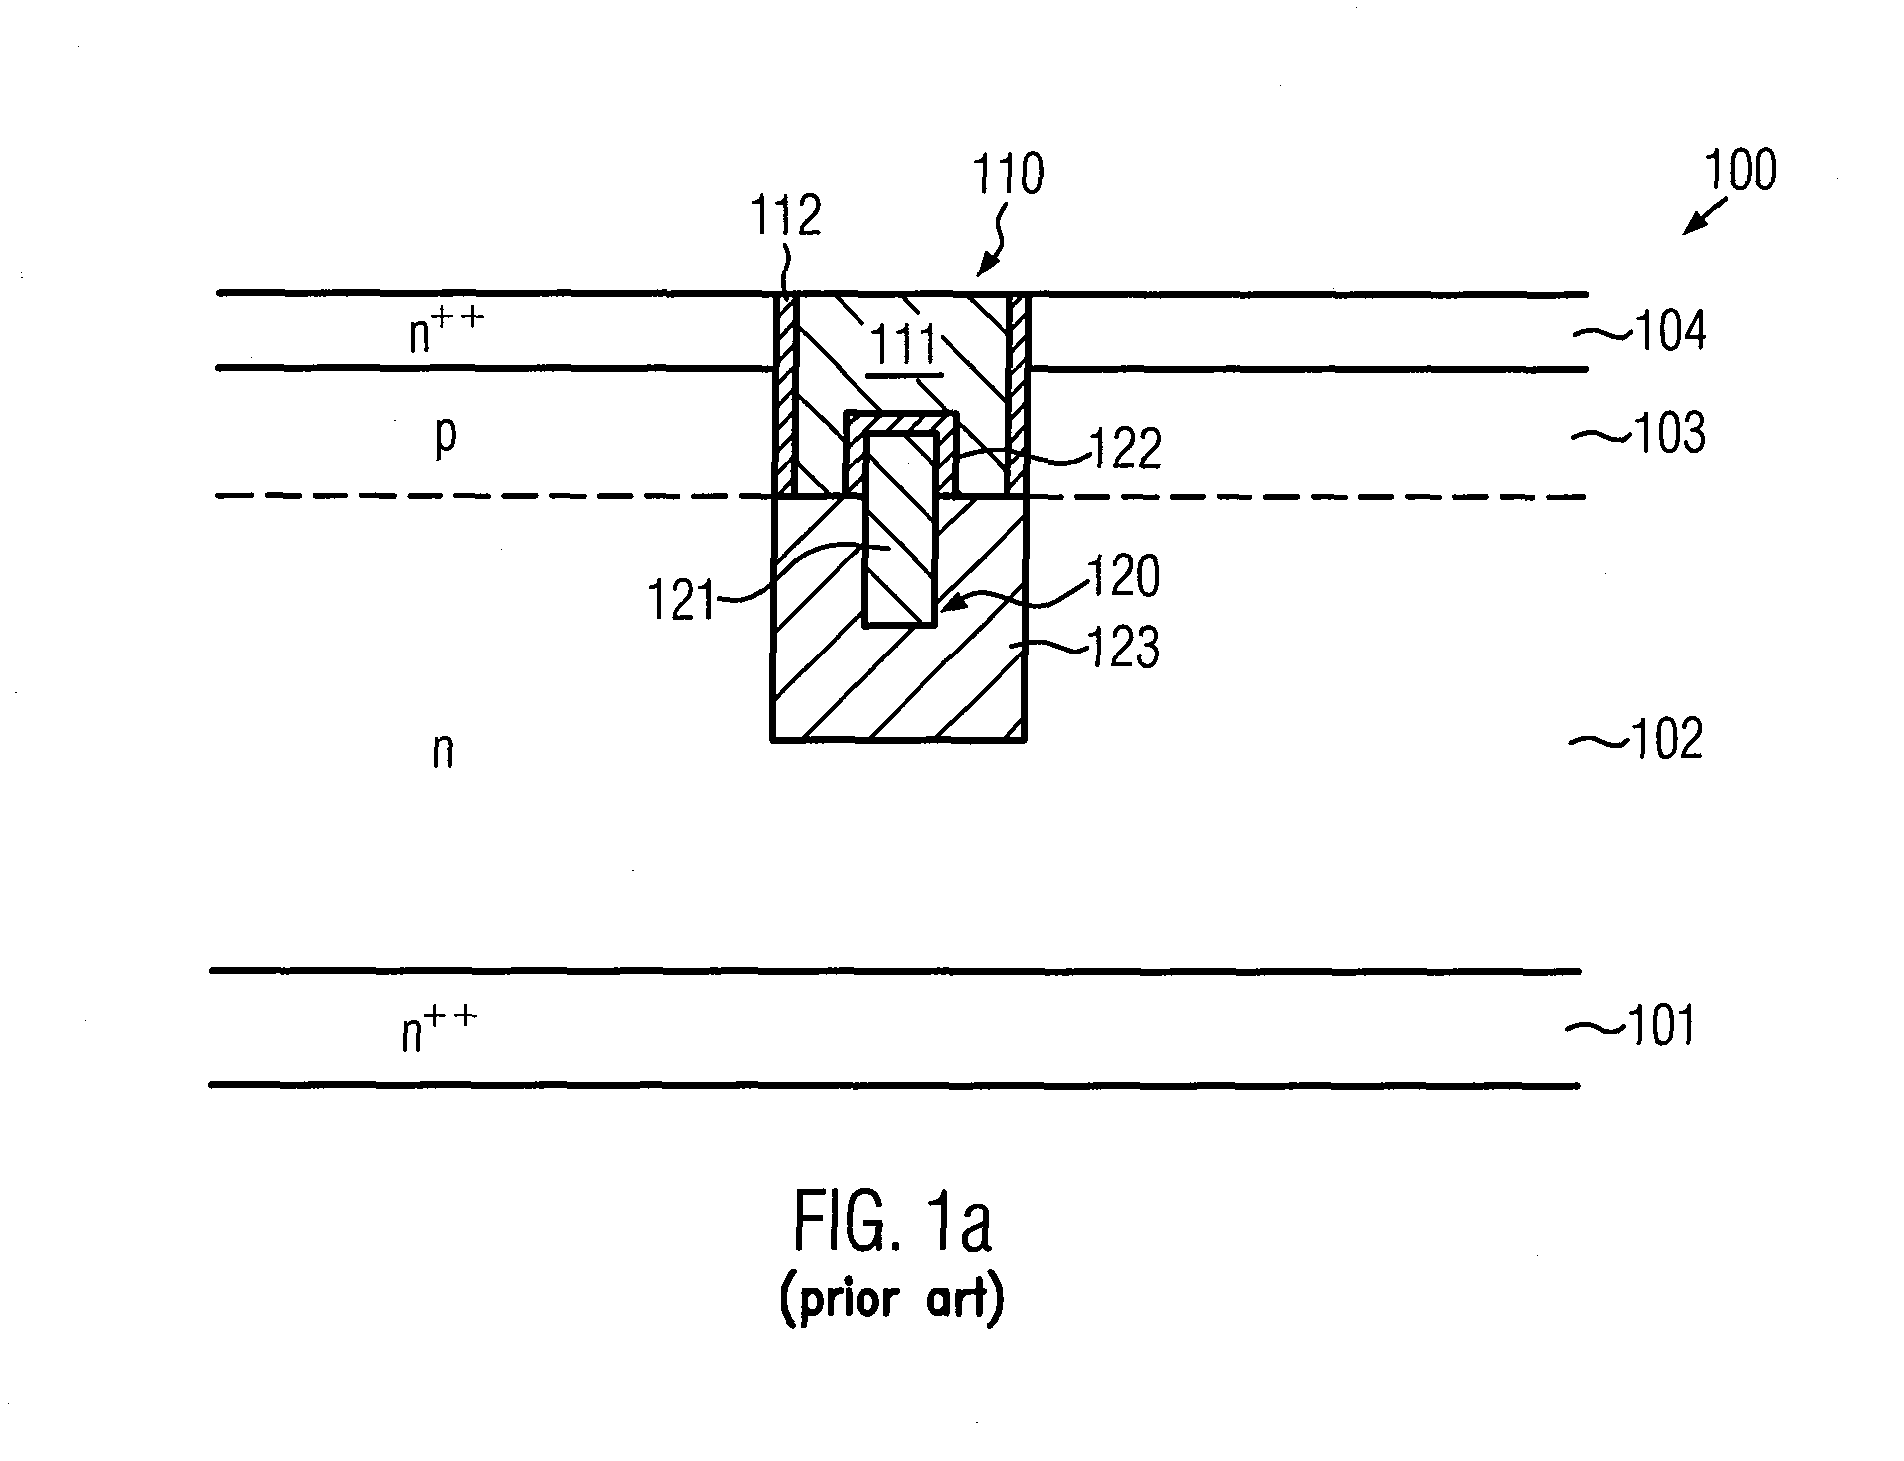 Method and a structure for enhancing electrical insulation and dynamic performance of MIS structures comprising vertical field plates